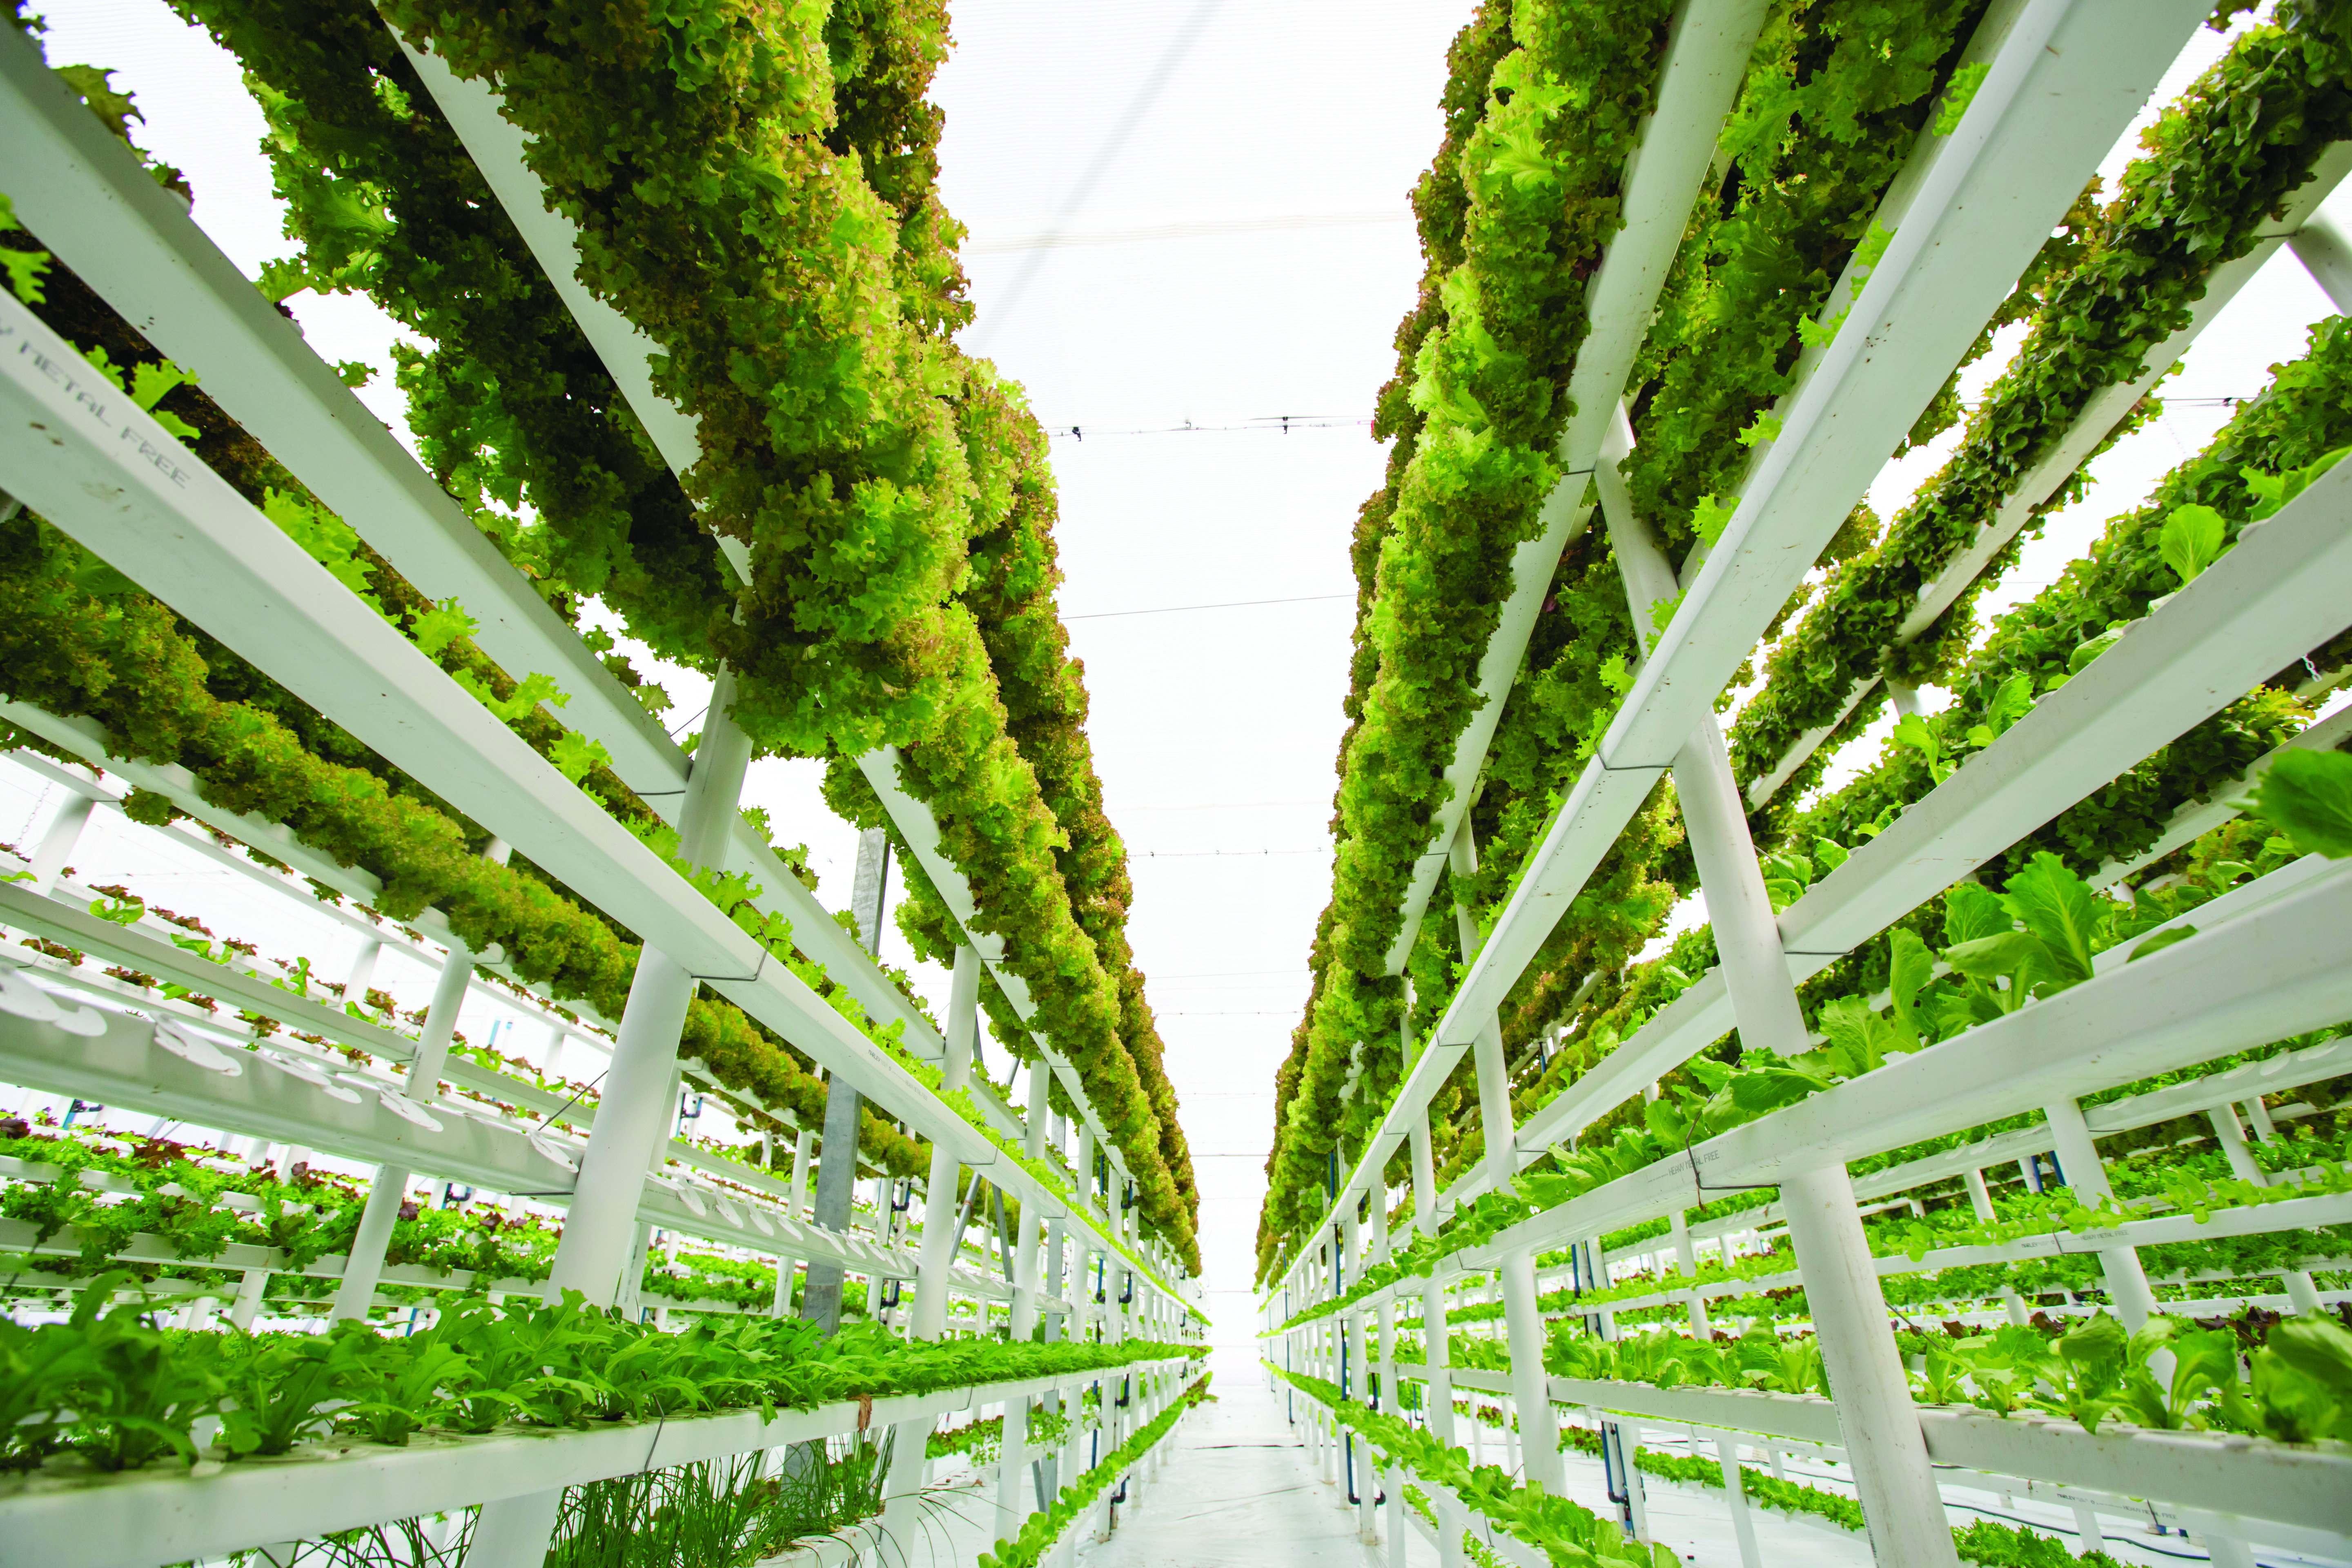 An example of a vertical farming system